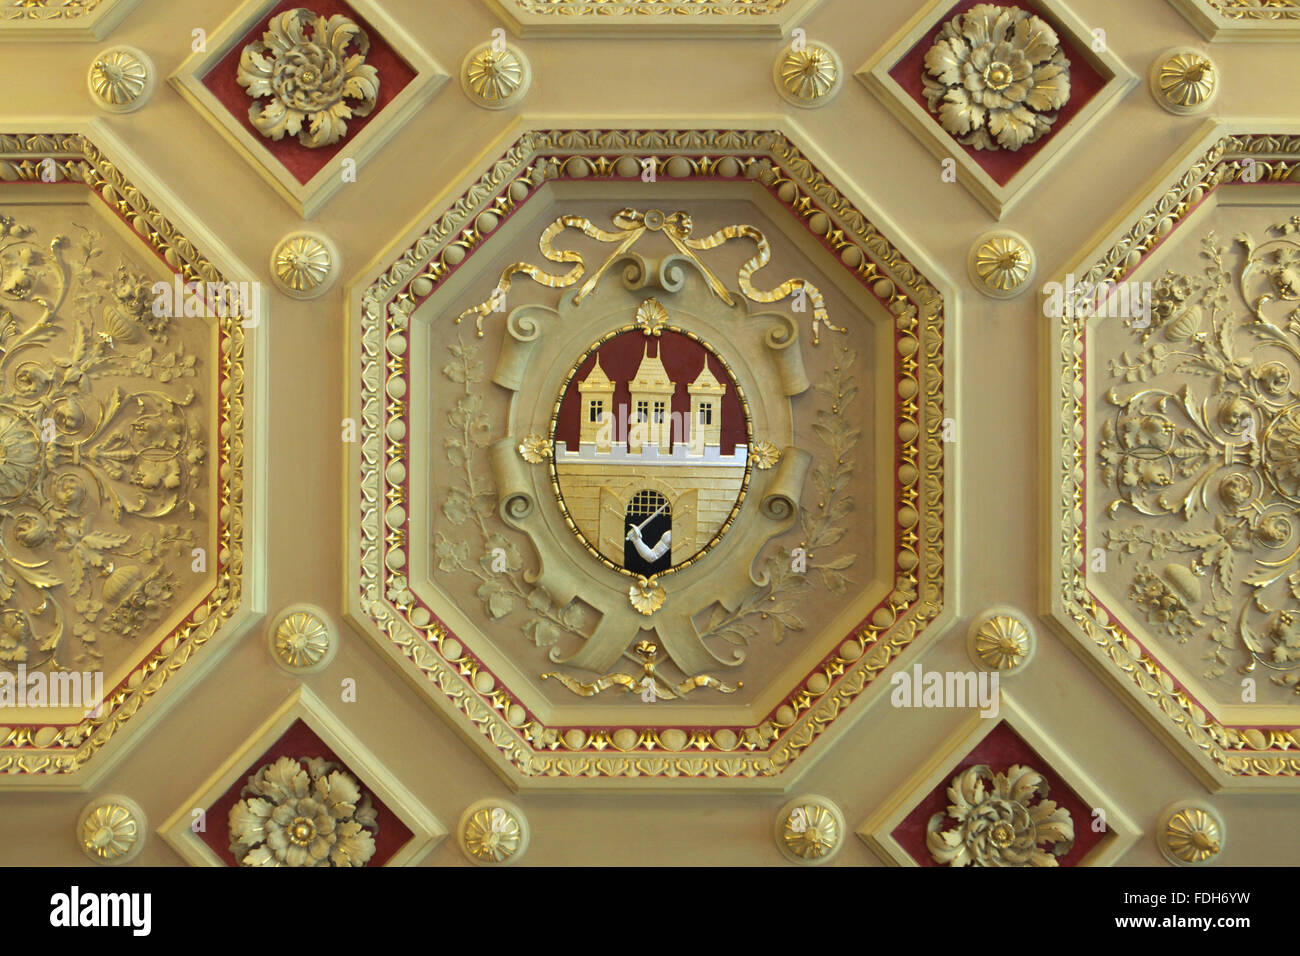 Coat of arms of Prague depicted on the stucco ceiling in the Zofin Palace on Slovansky Island in Prague, Czech Republic. Stock Photo